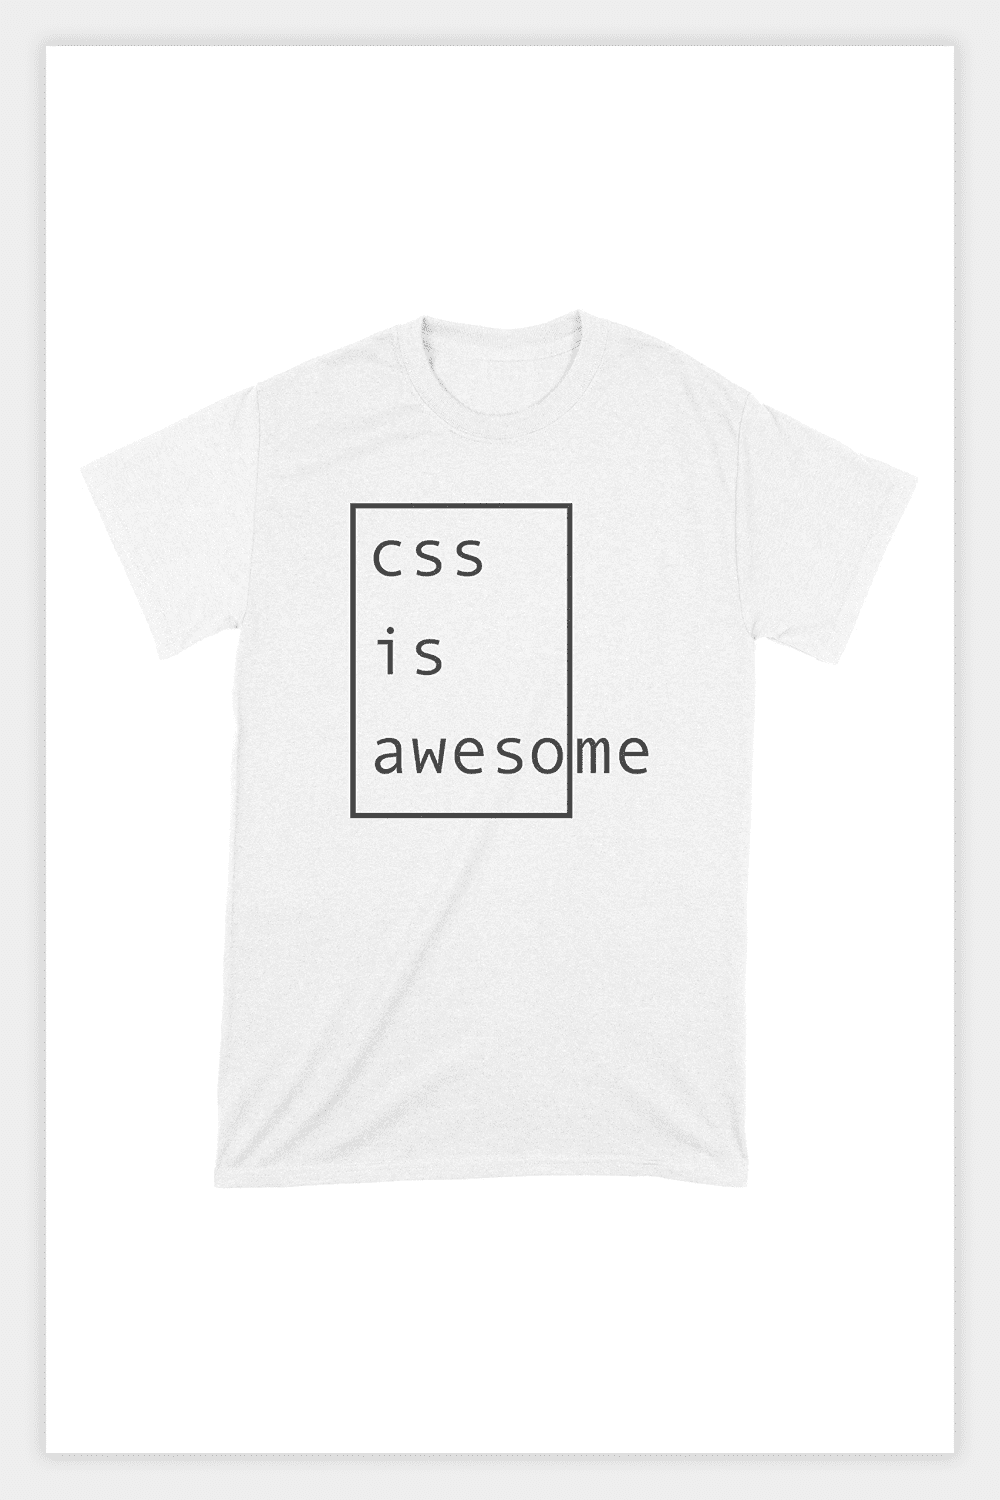 White t-shirt with black rectangle and black text.